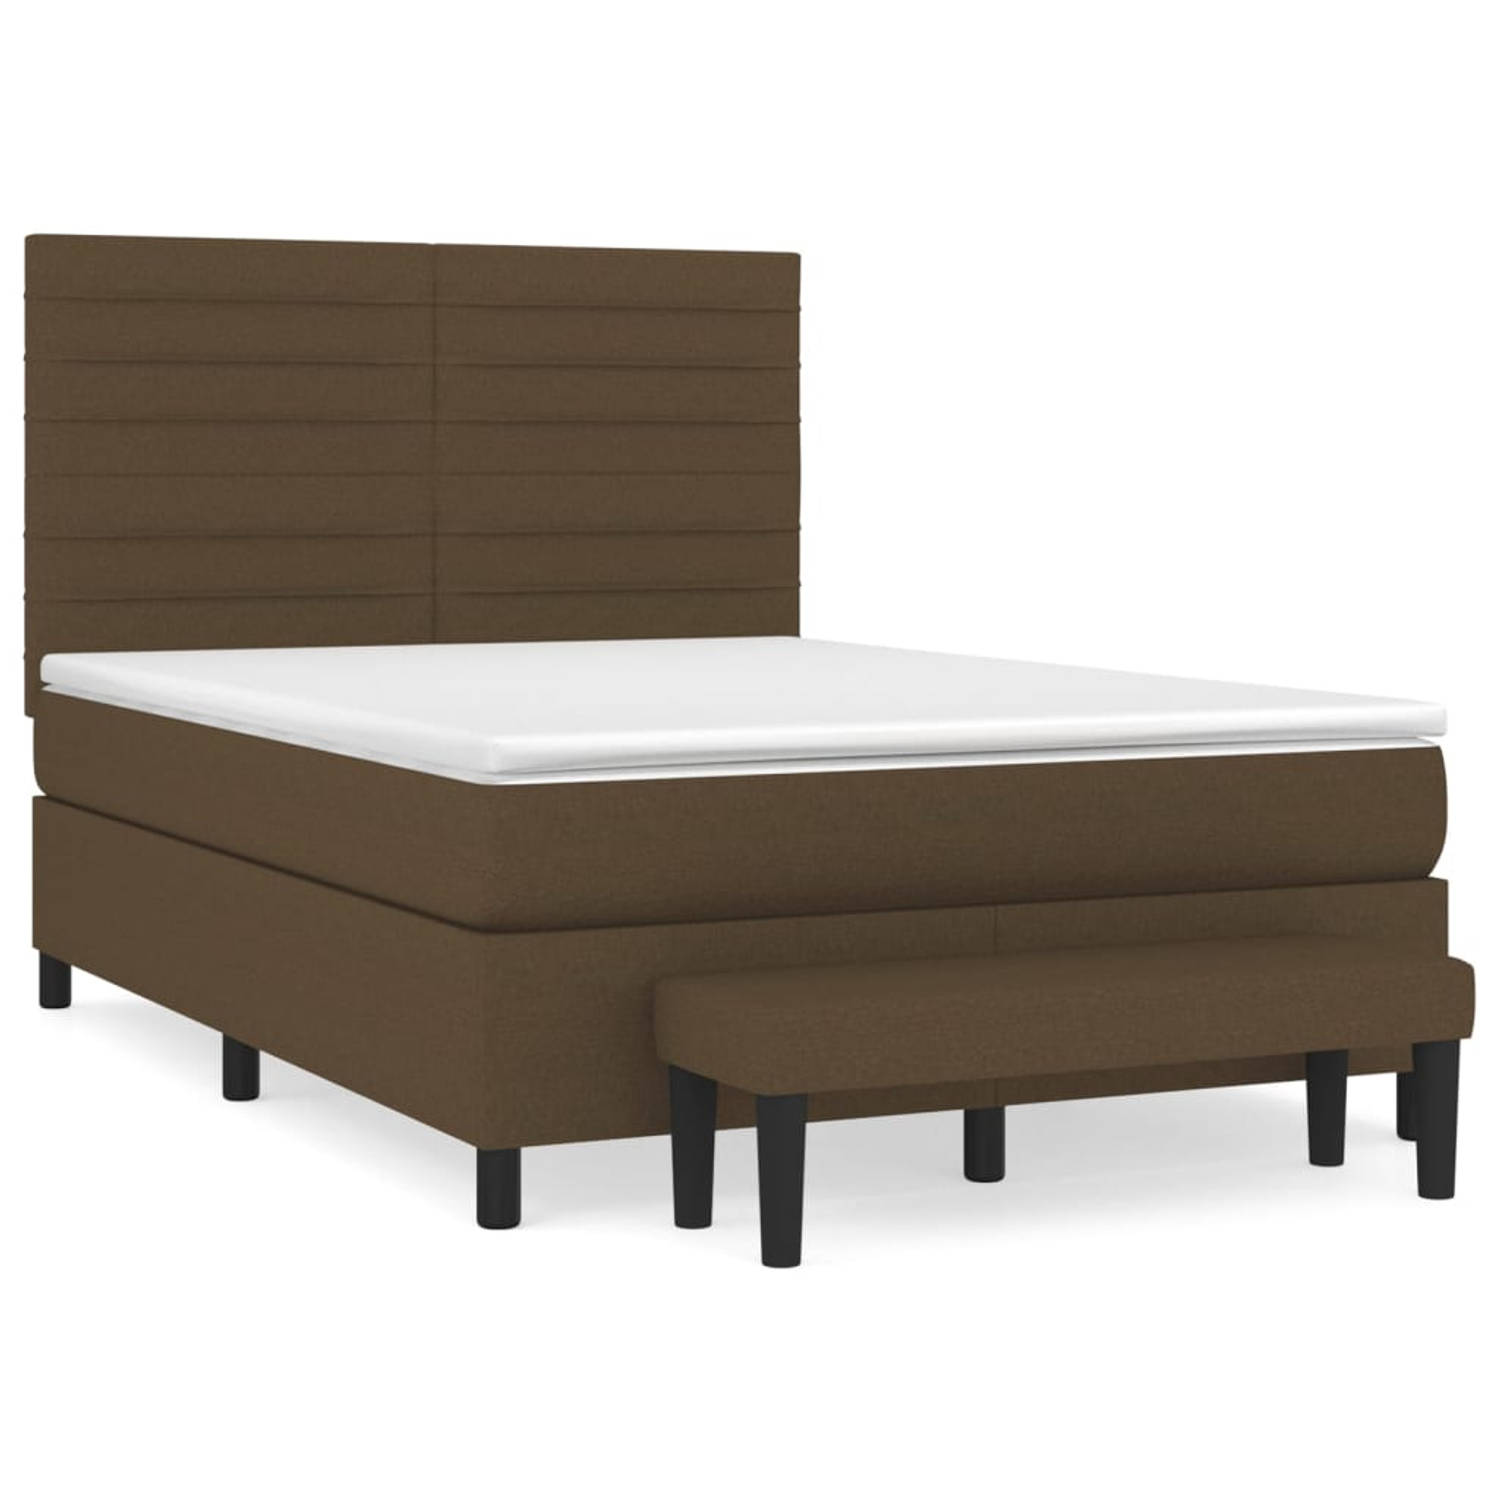 The Living Store Boxspringbed - Comfort - Bed - 193 x 144 x 118/128 cm - Donkerbruin